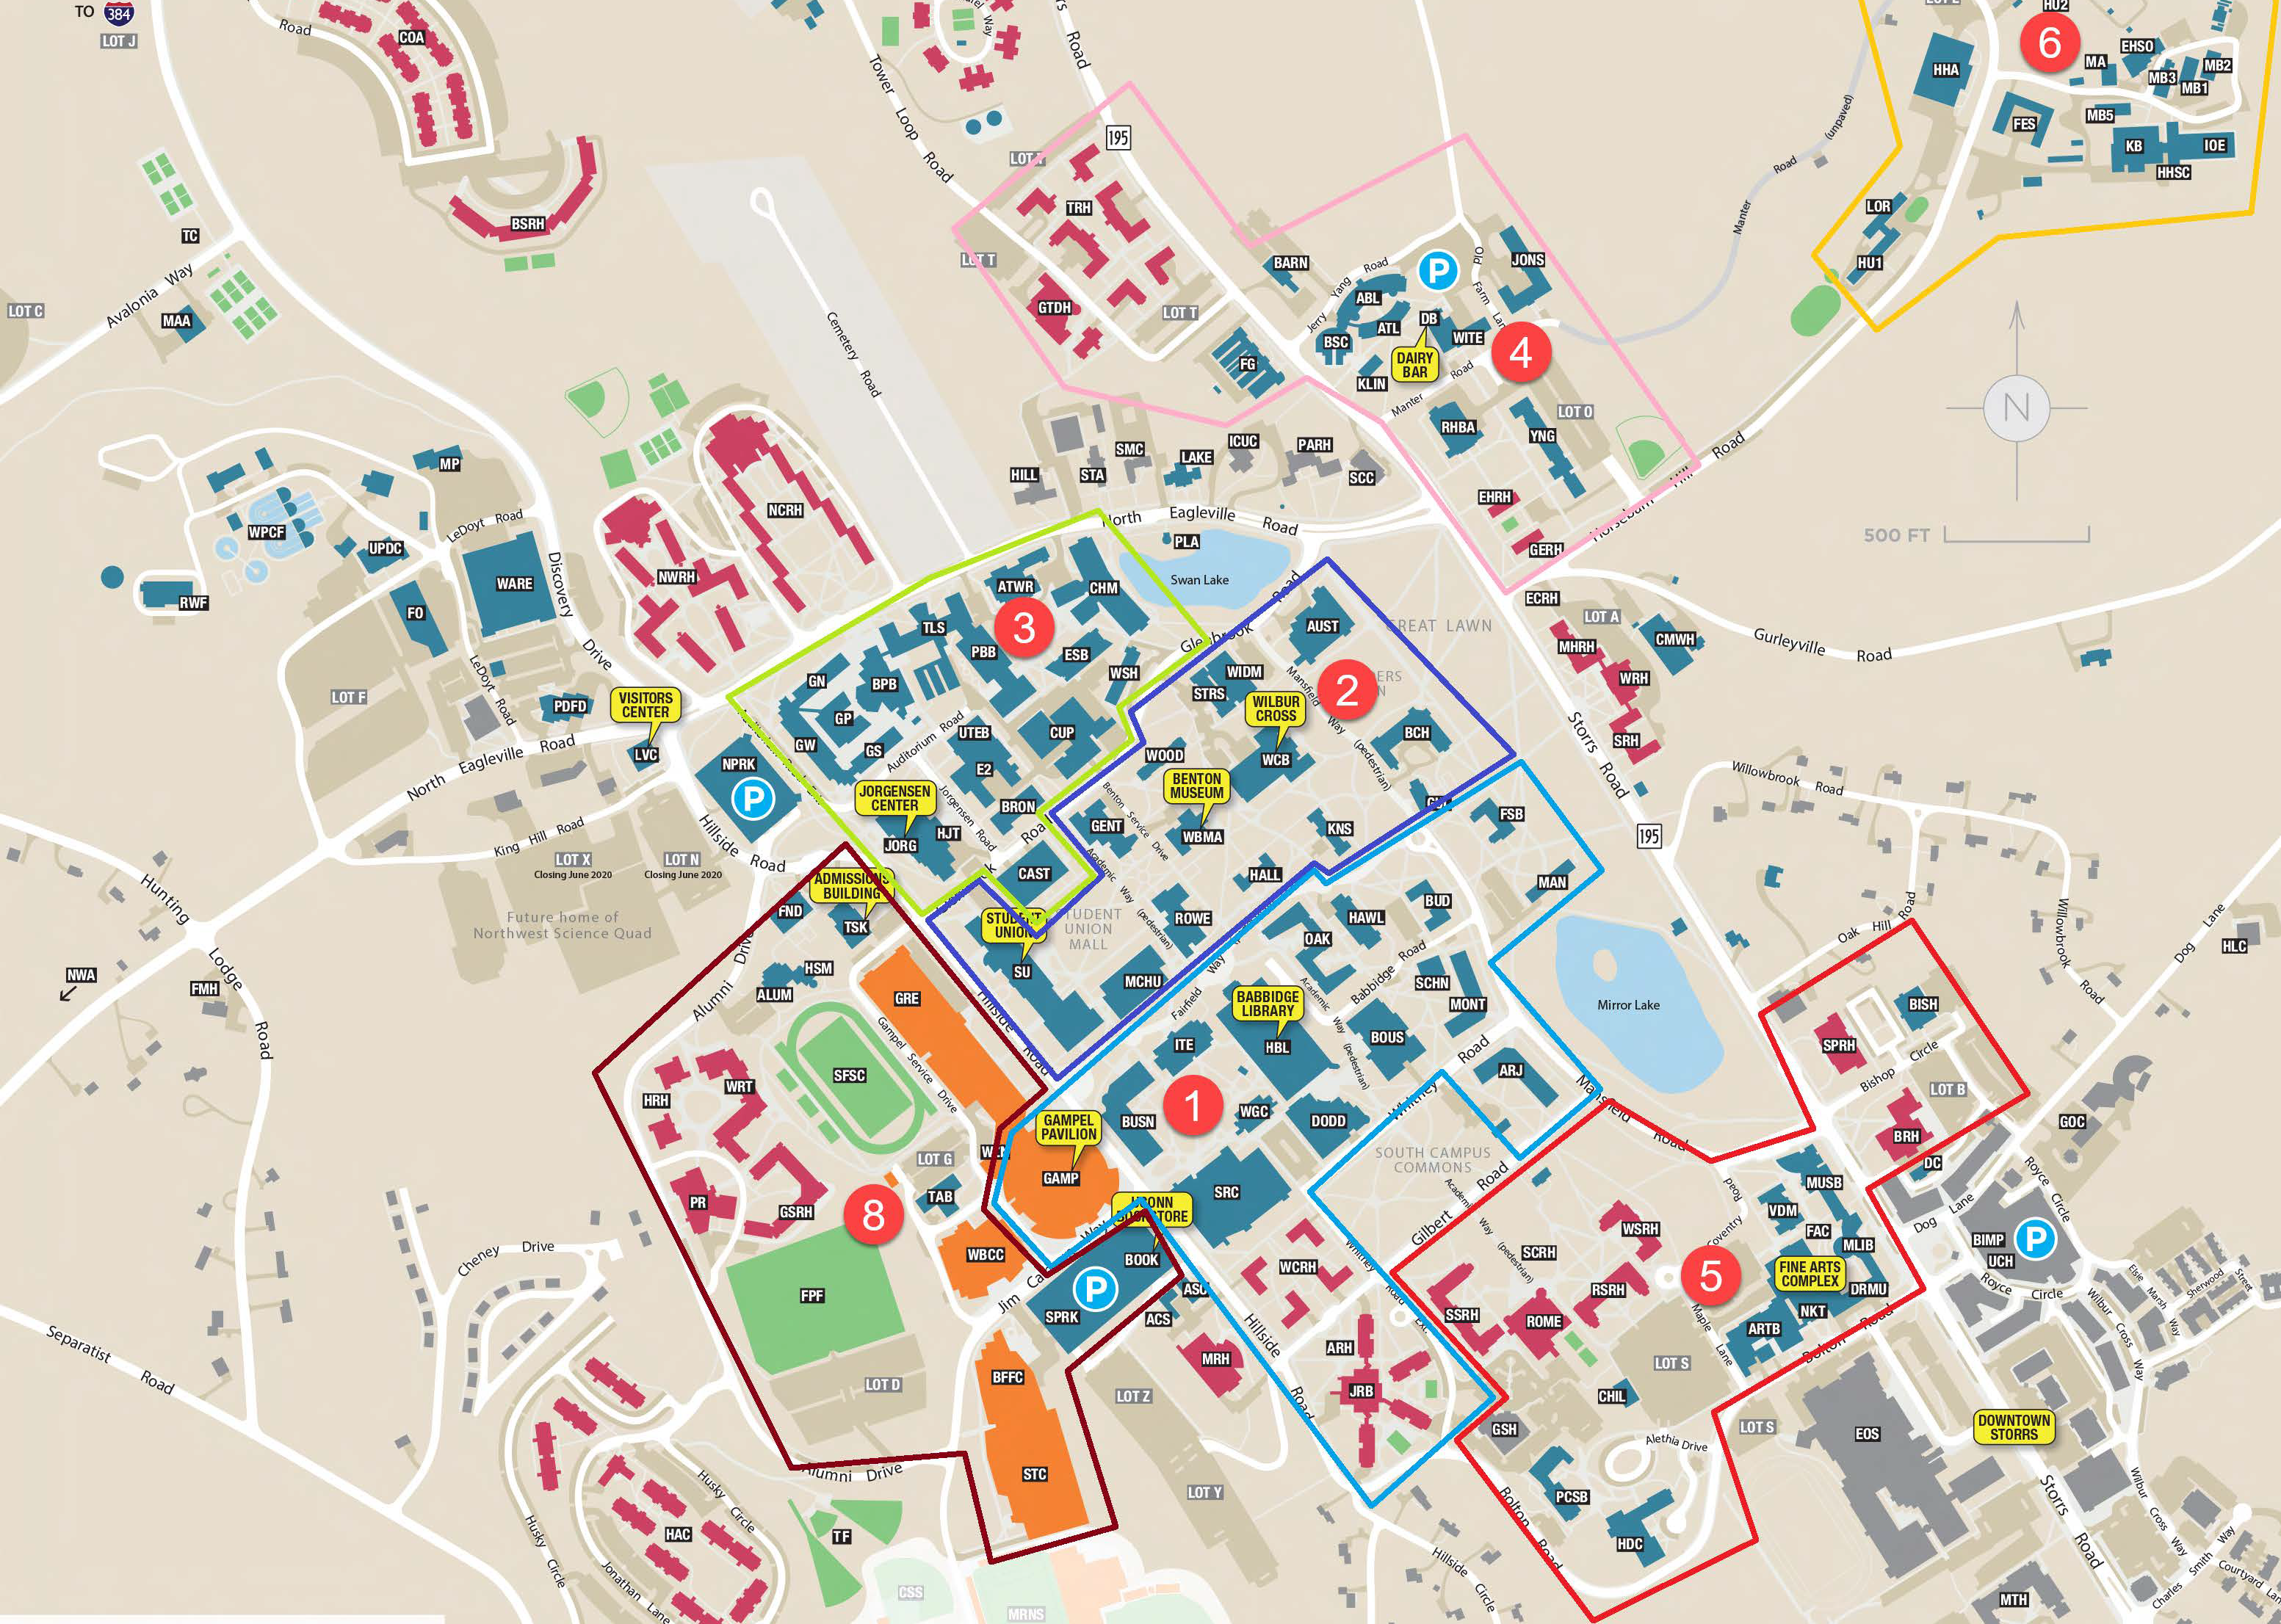 Map of Storrs academic areas